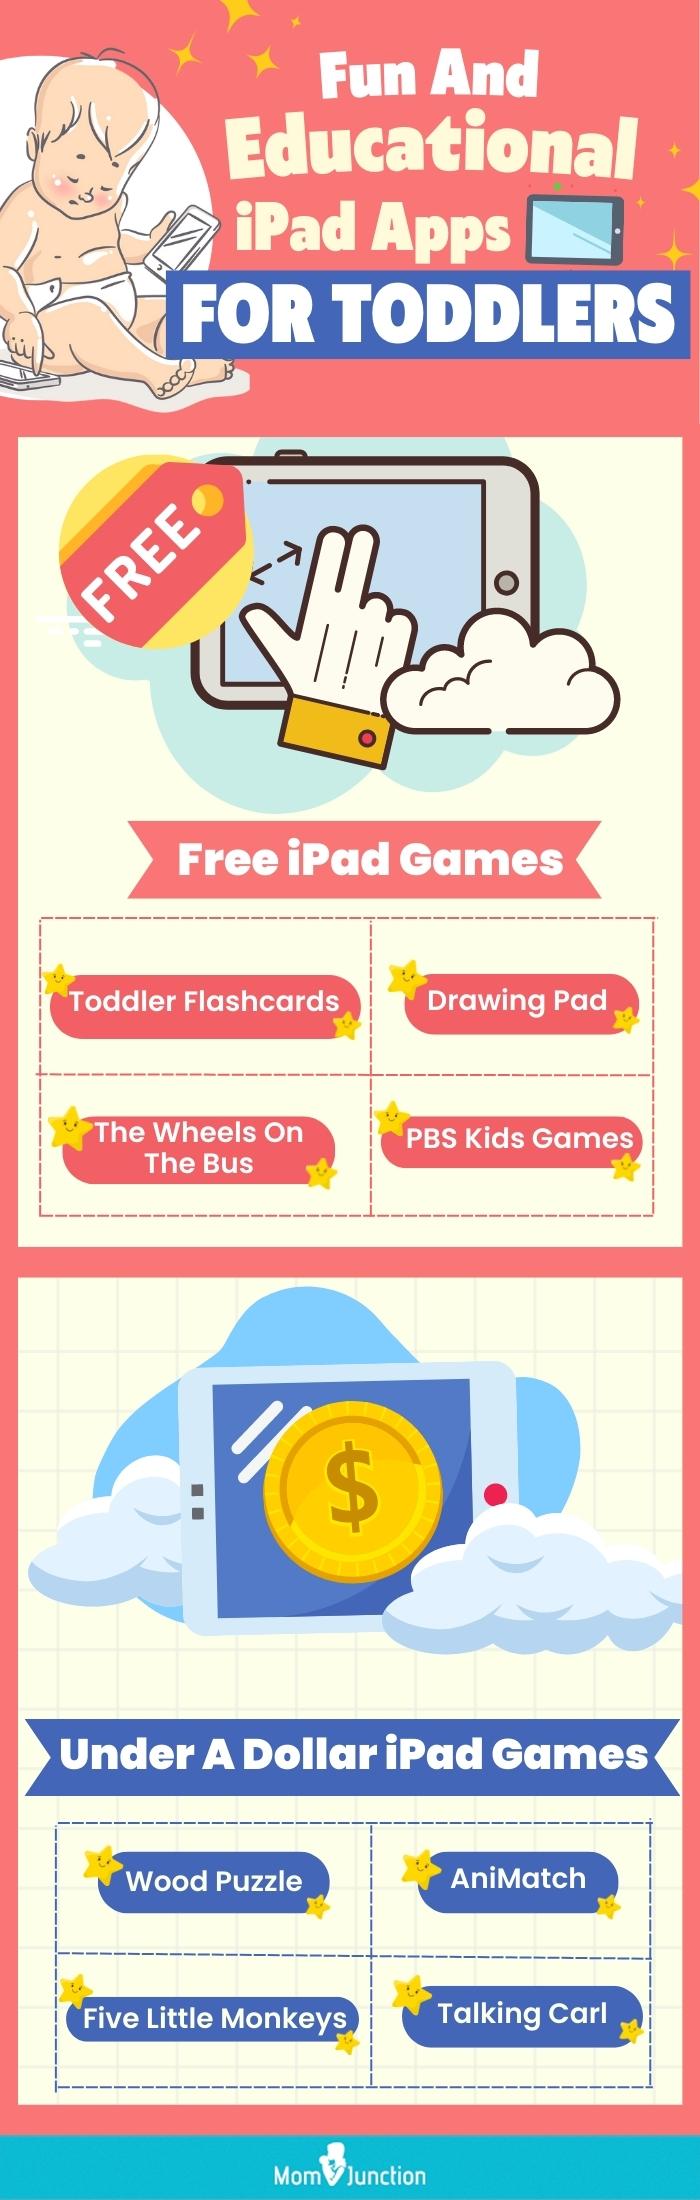 fun and educational ipad apps for toddlers (infographic)